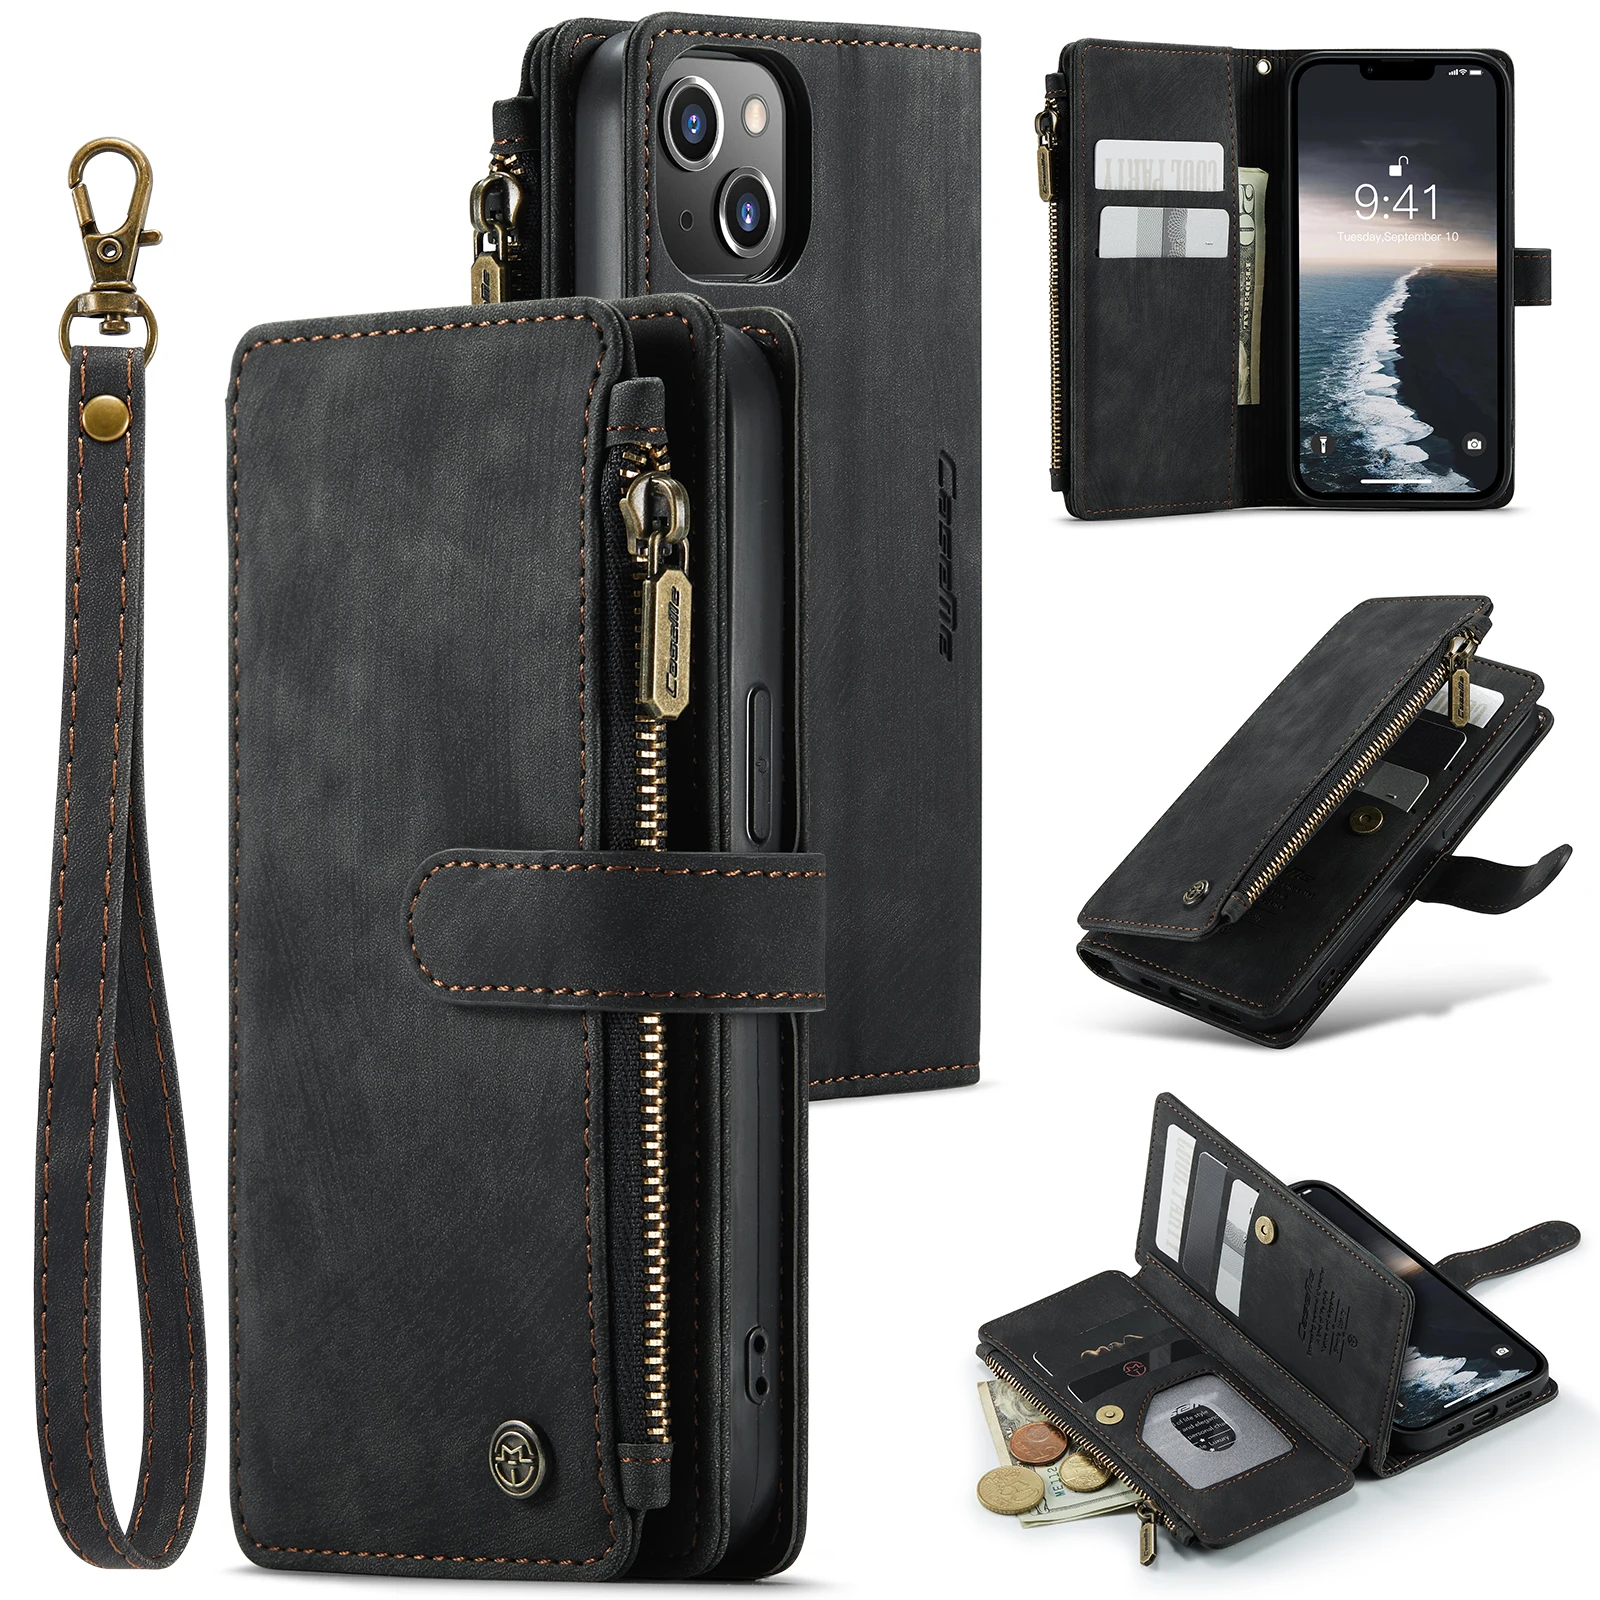 

CaseMe-C30 Multifunctional Flip Wallet Case, Luxury Skins Cover, Samsung Galaxy A12, A22, A32, A52, A72, 5G, S9, S10, New Purse